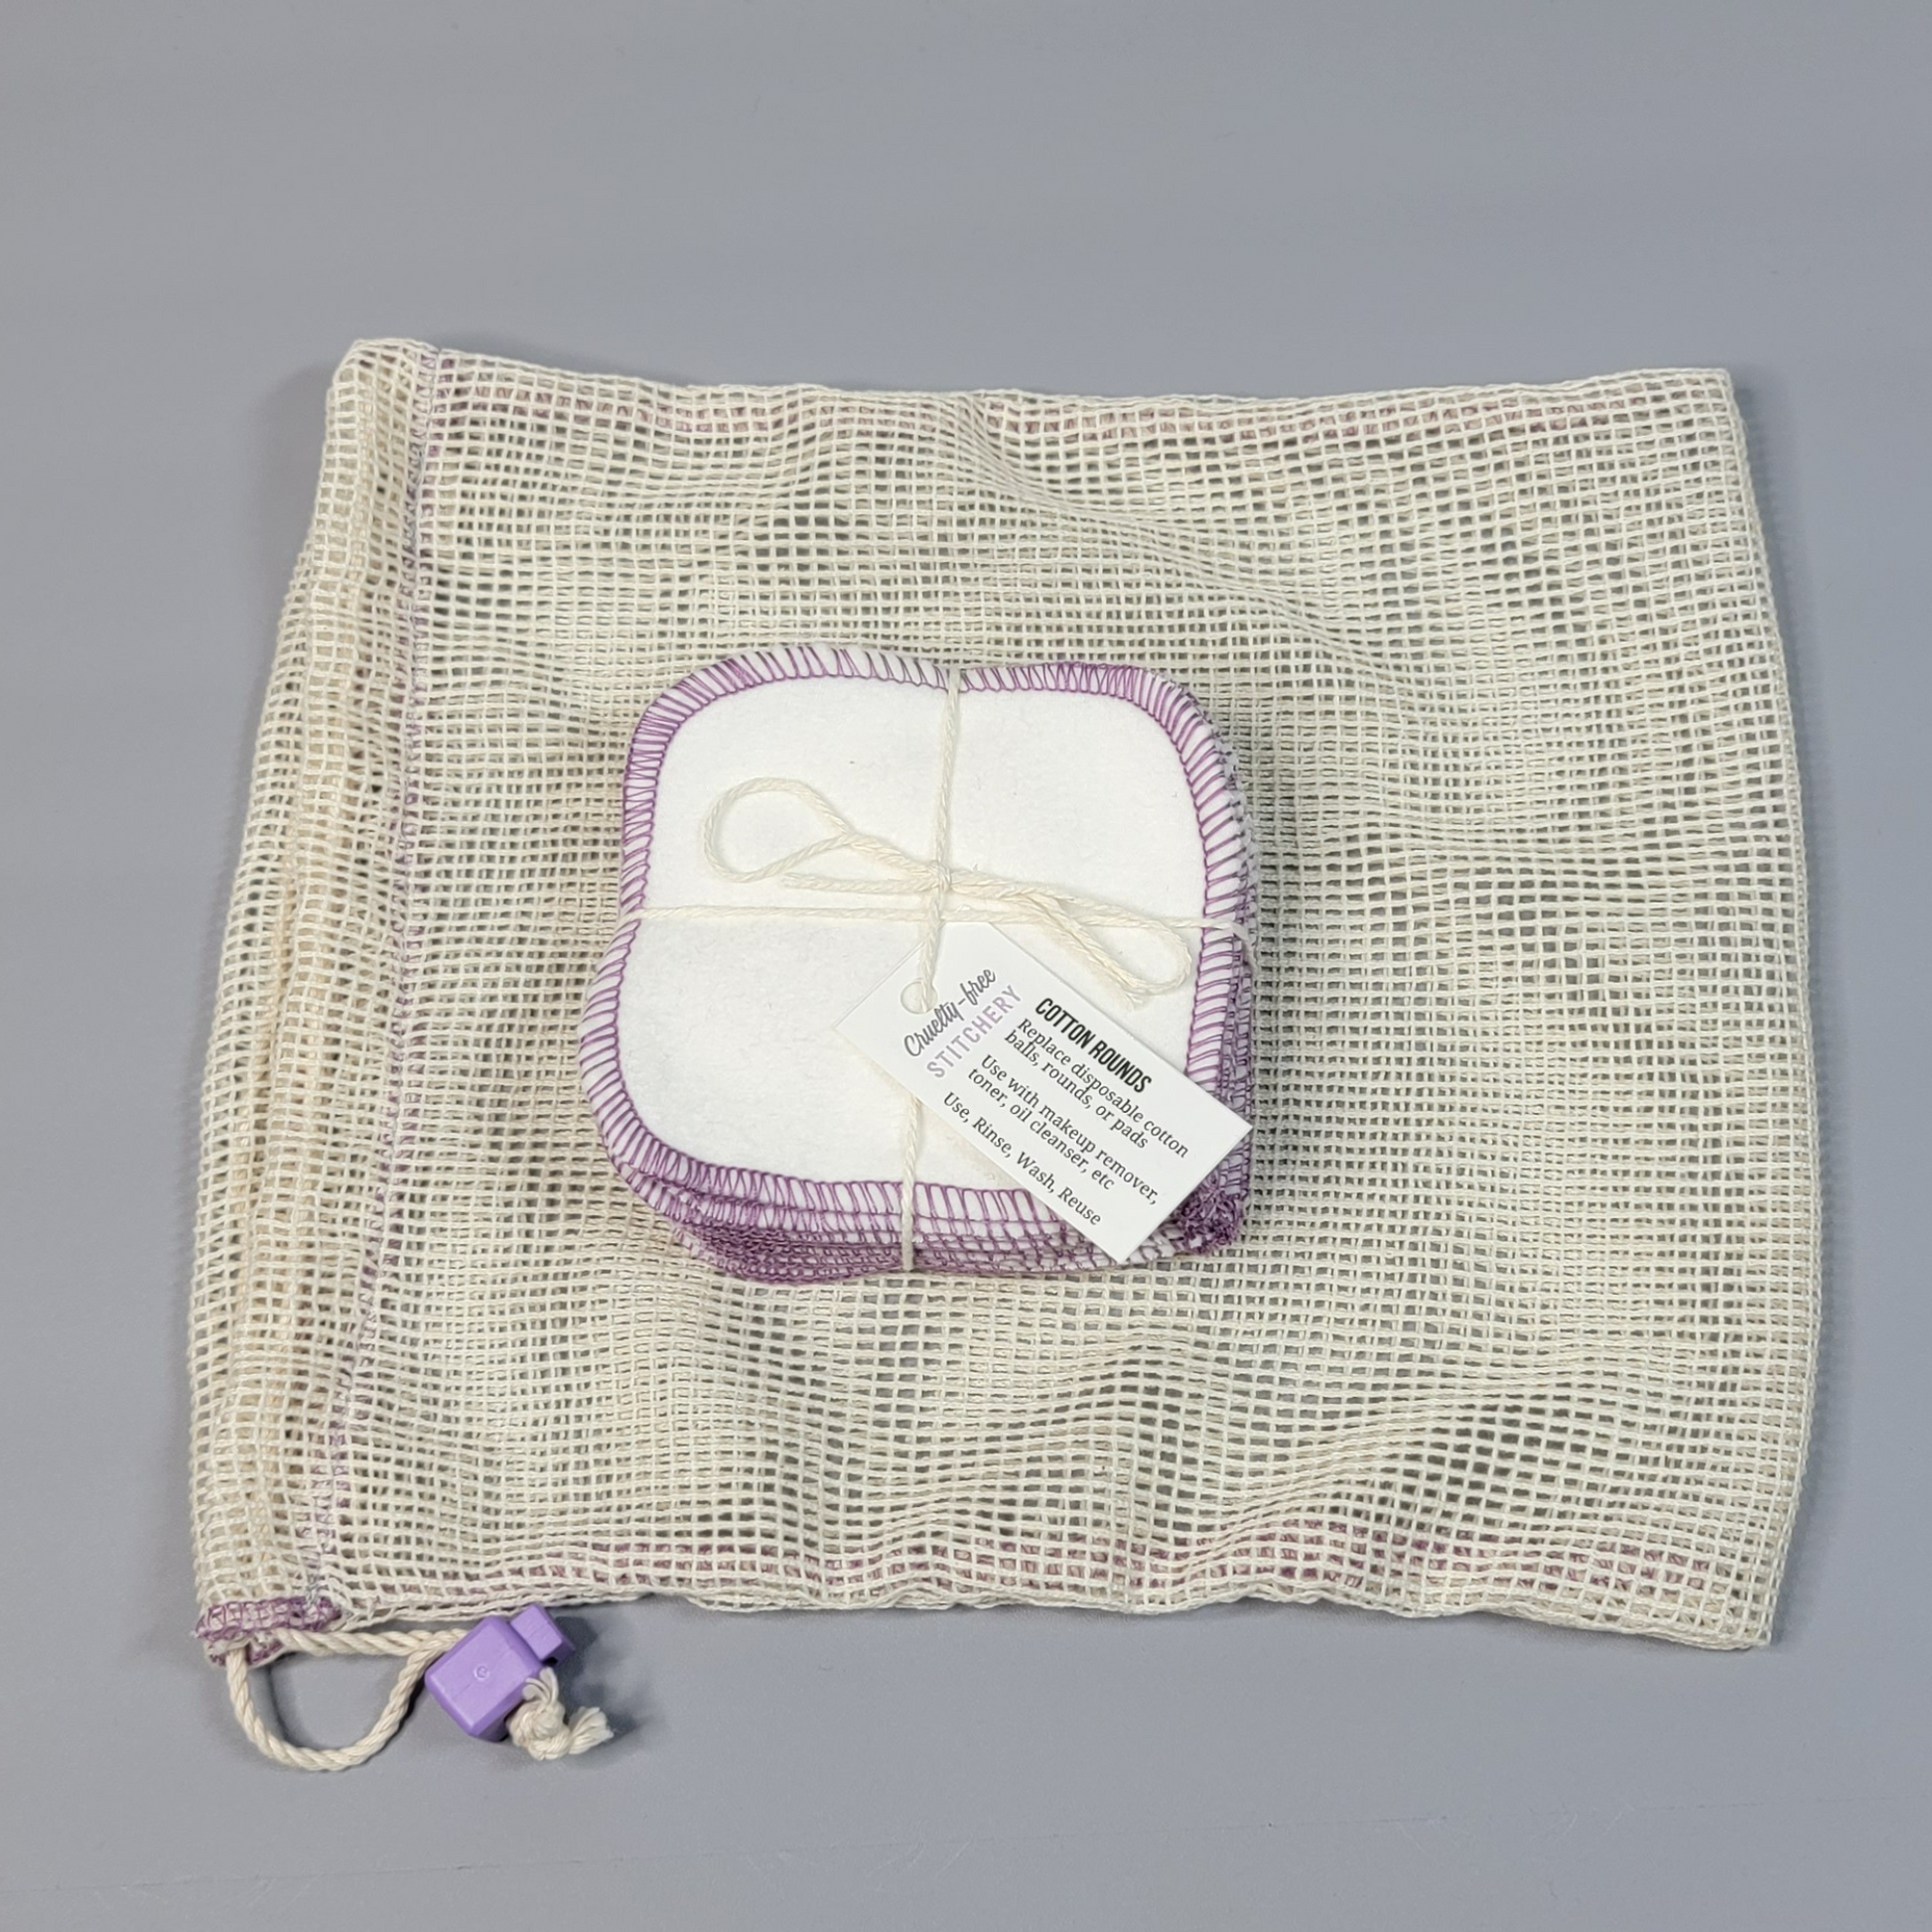 A pack of white reusable cotton rounds on top of a mesh washing bag - the bag is an off-white color with square mesh, and a light purple cord stopper.